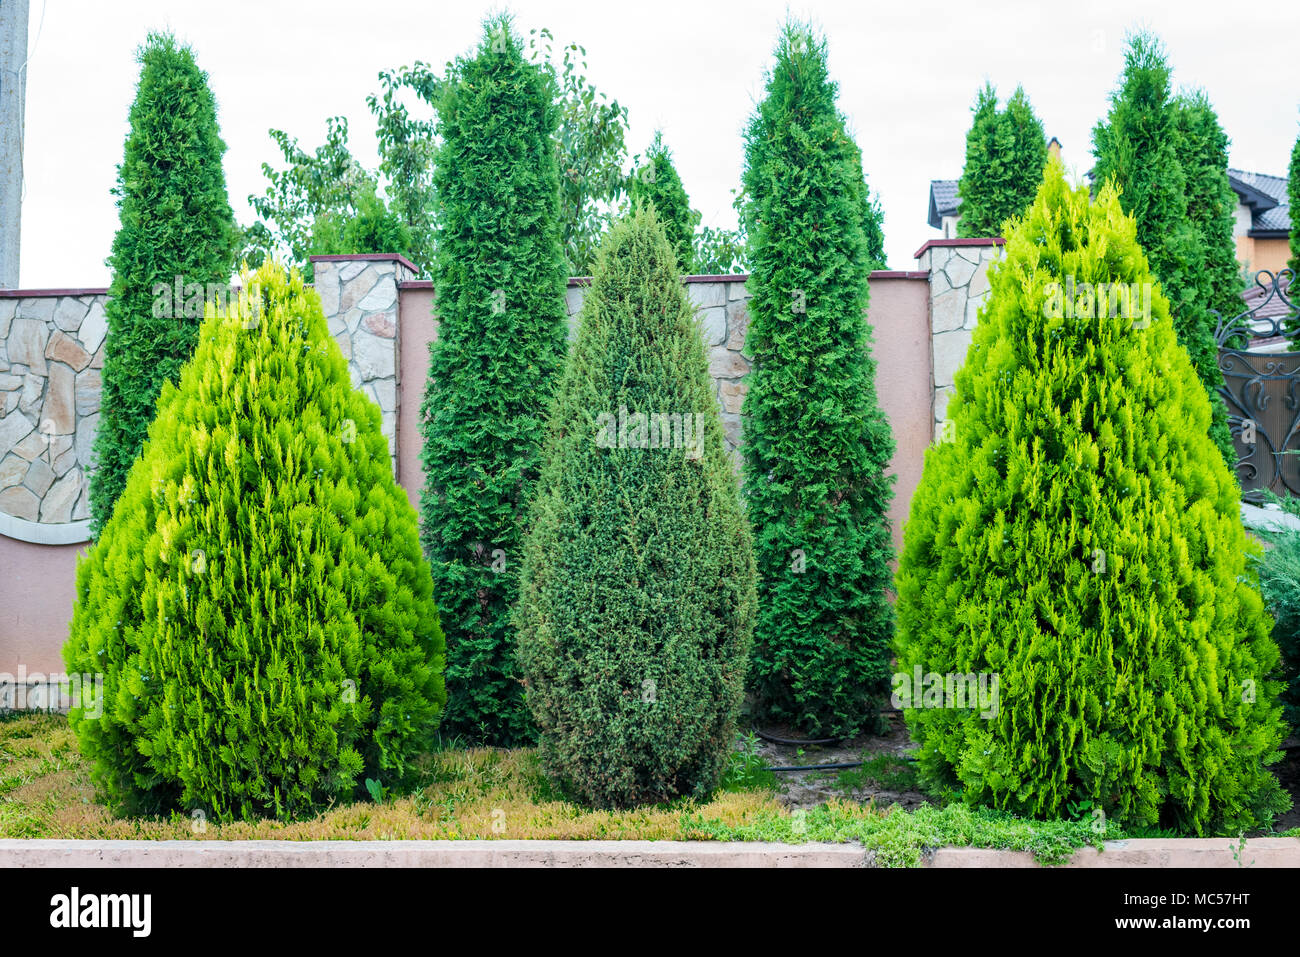 decorative evergreen trees for landscaping Stock Photo